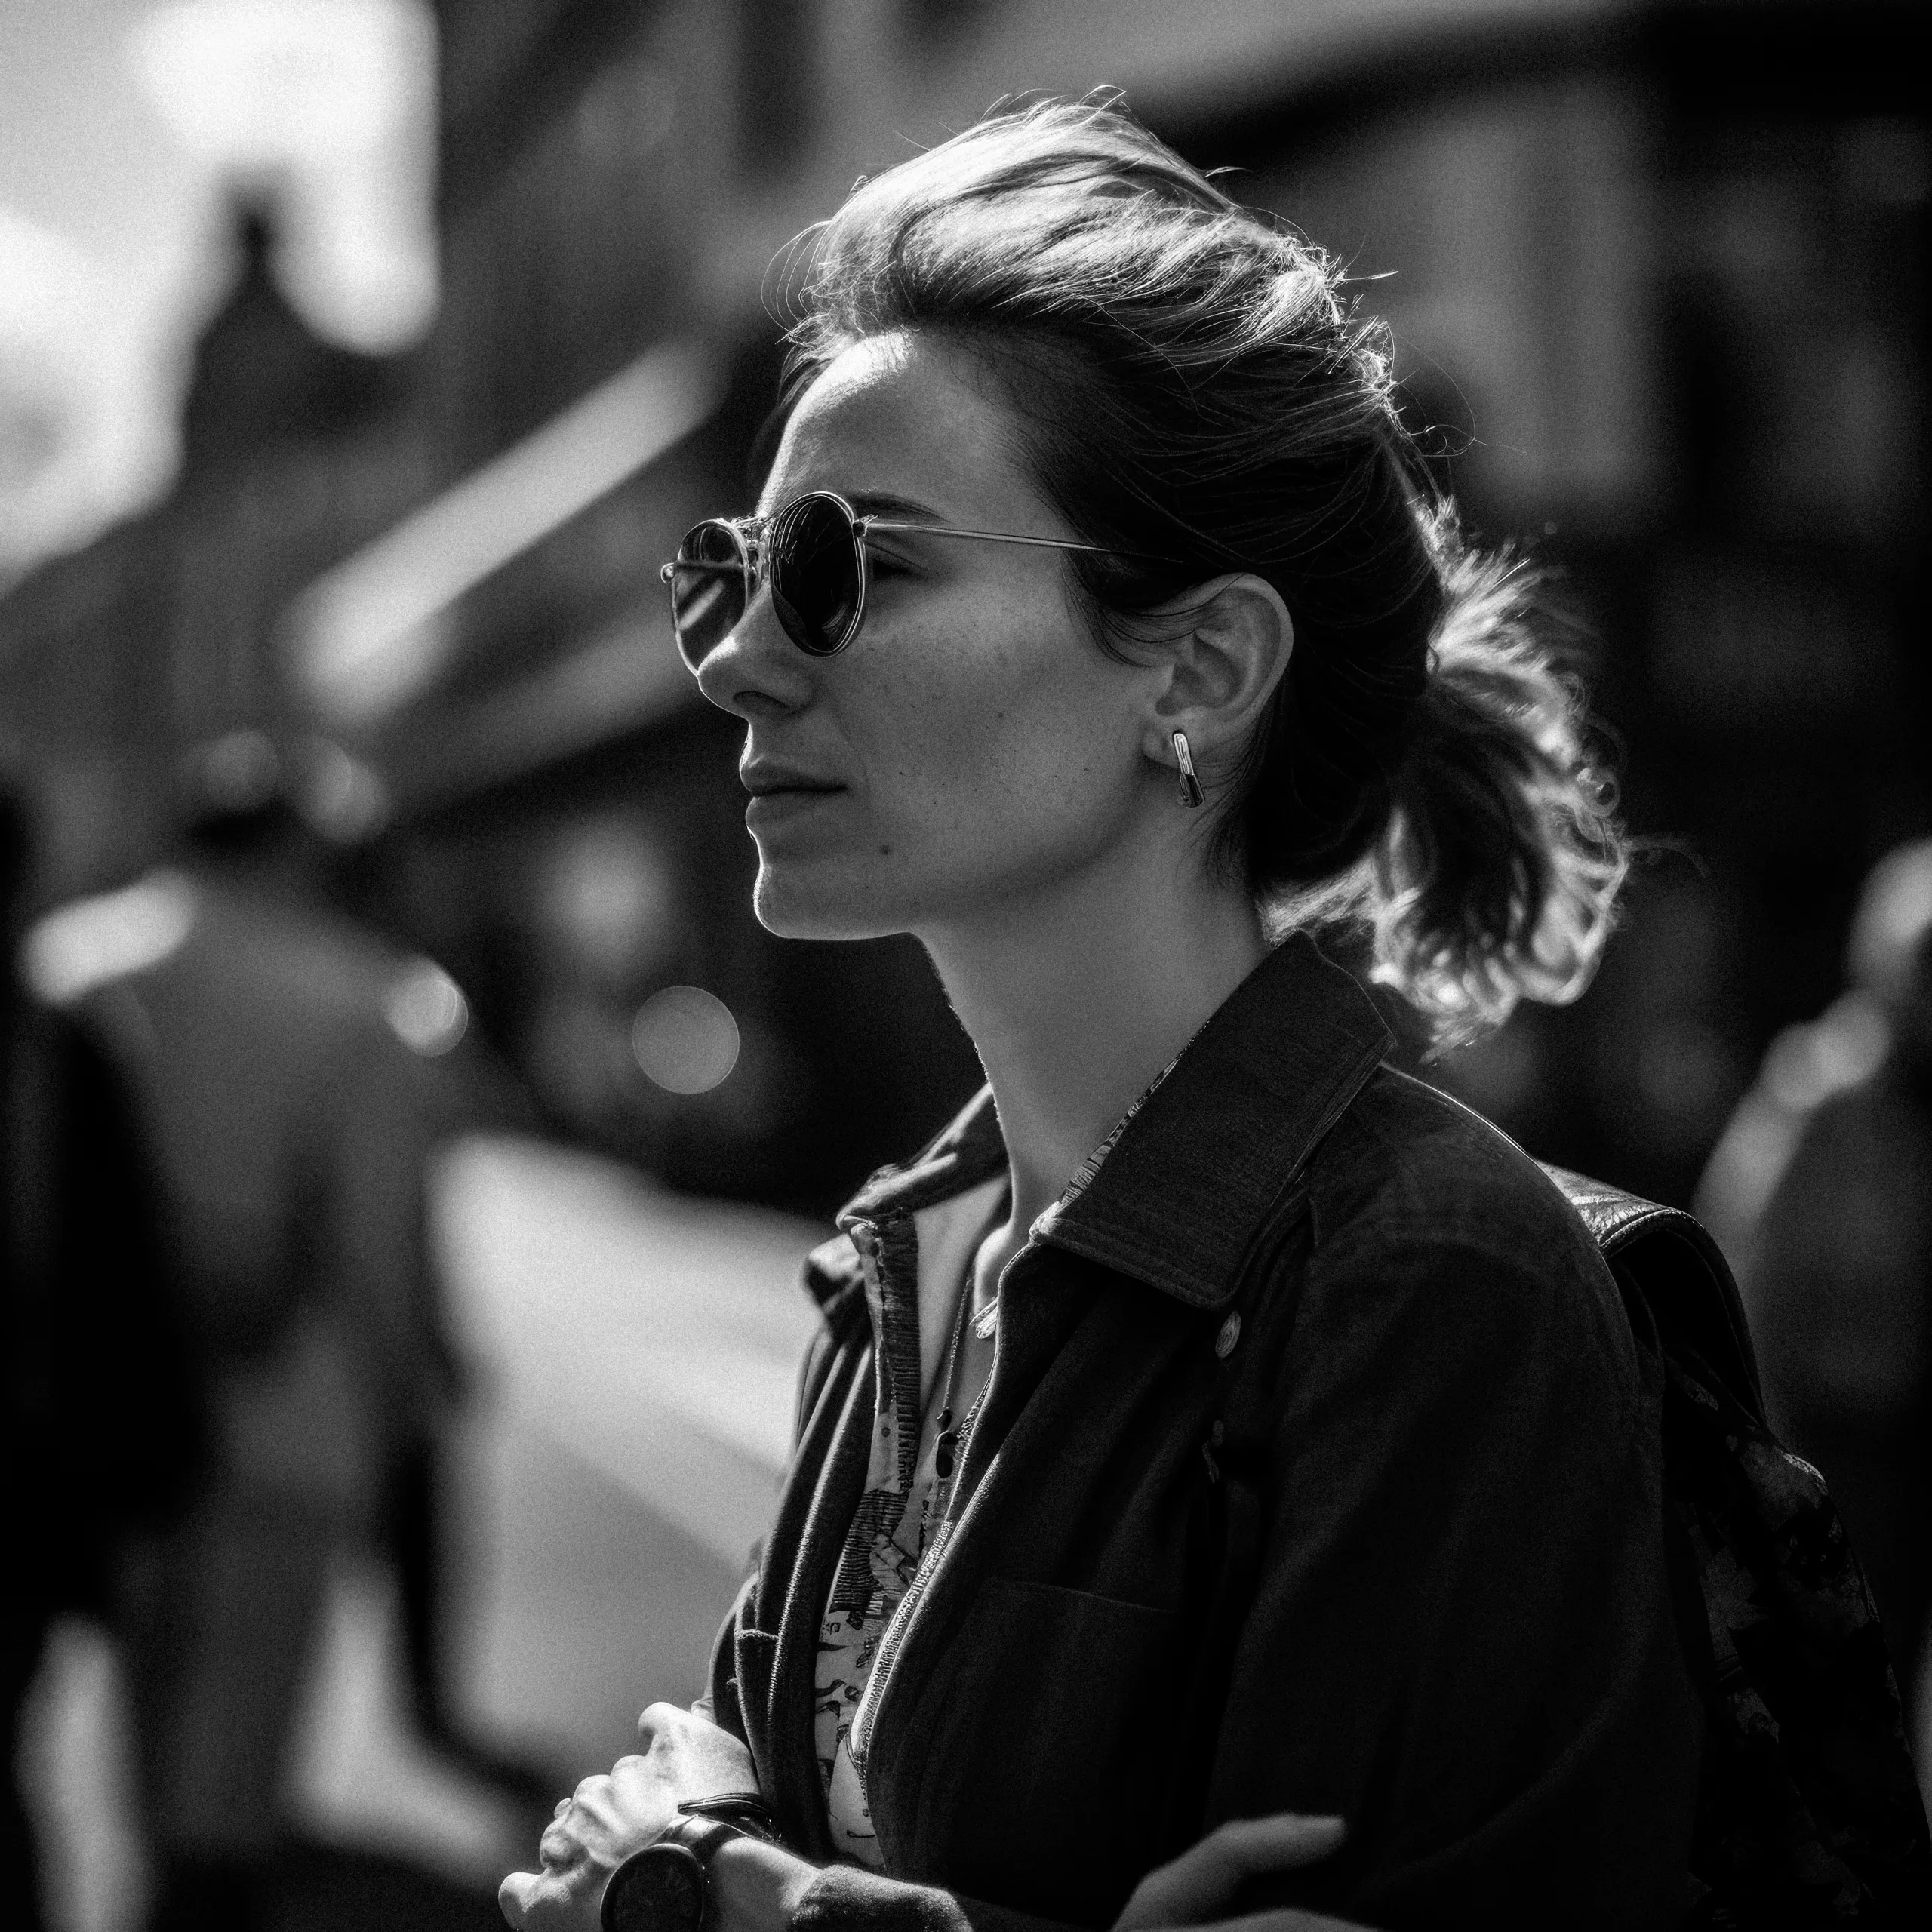 Street Photography:a woman in sunglasses is standing on the street.